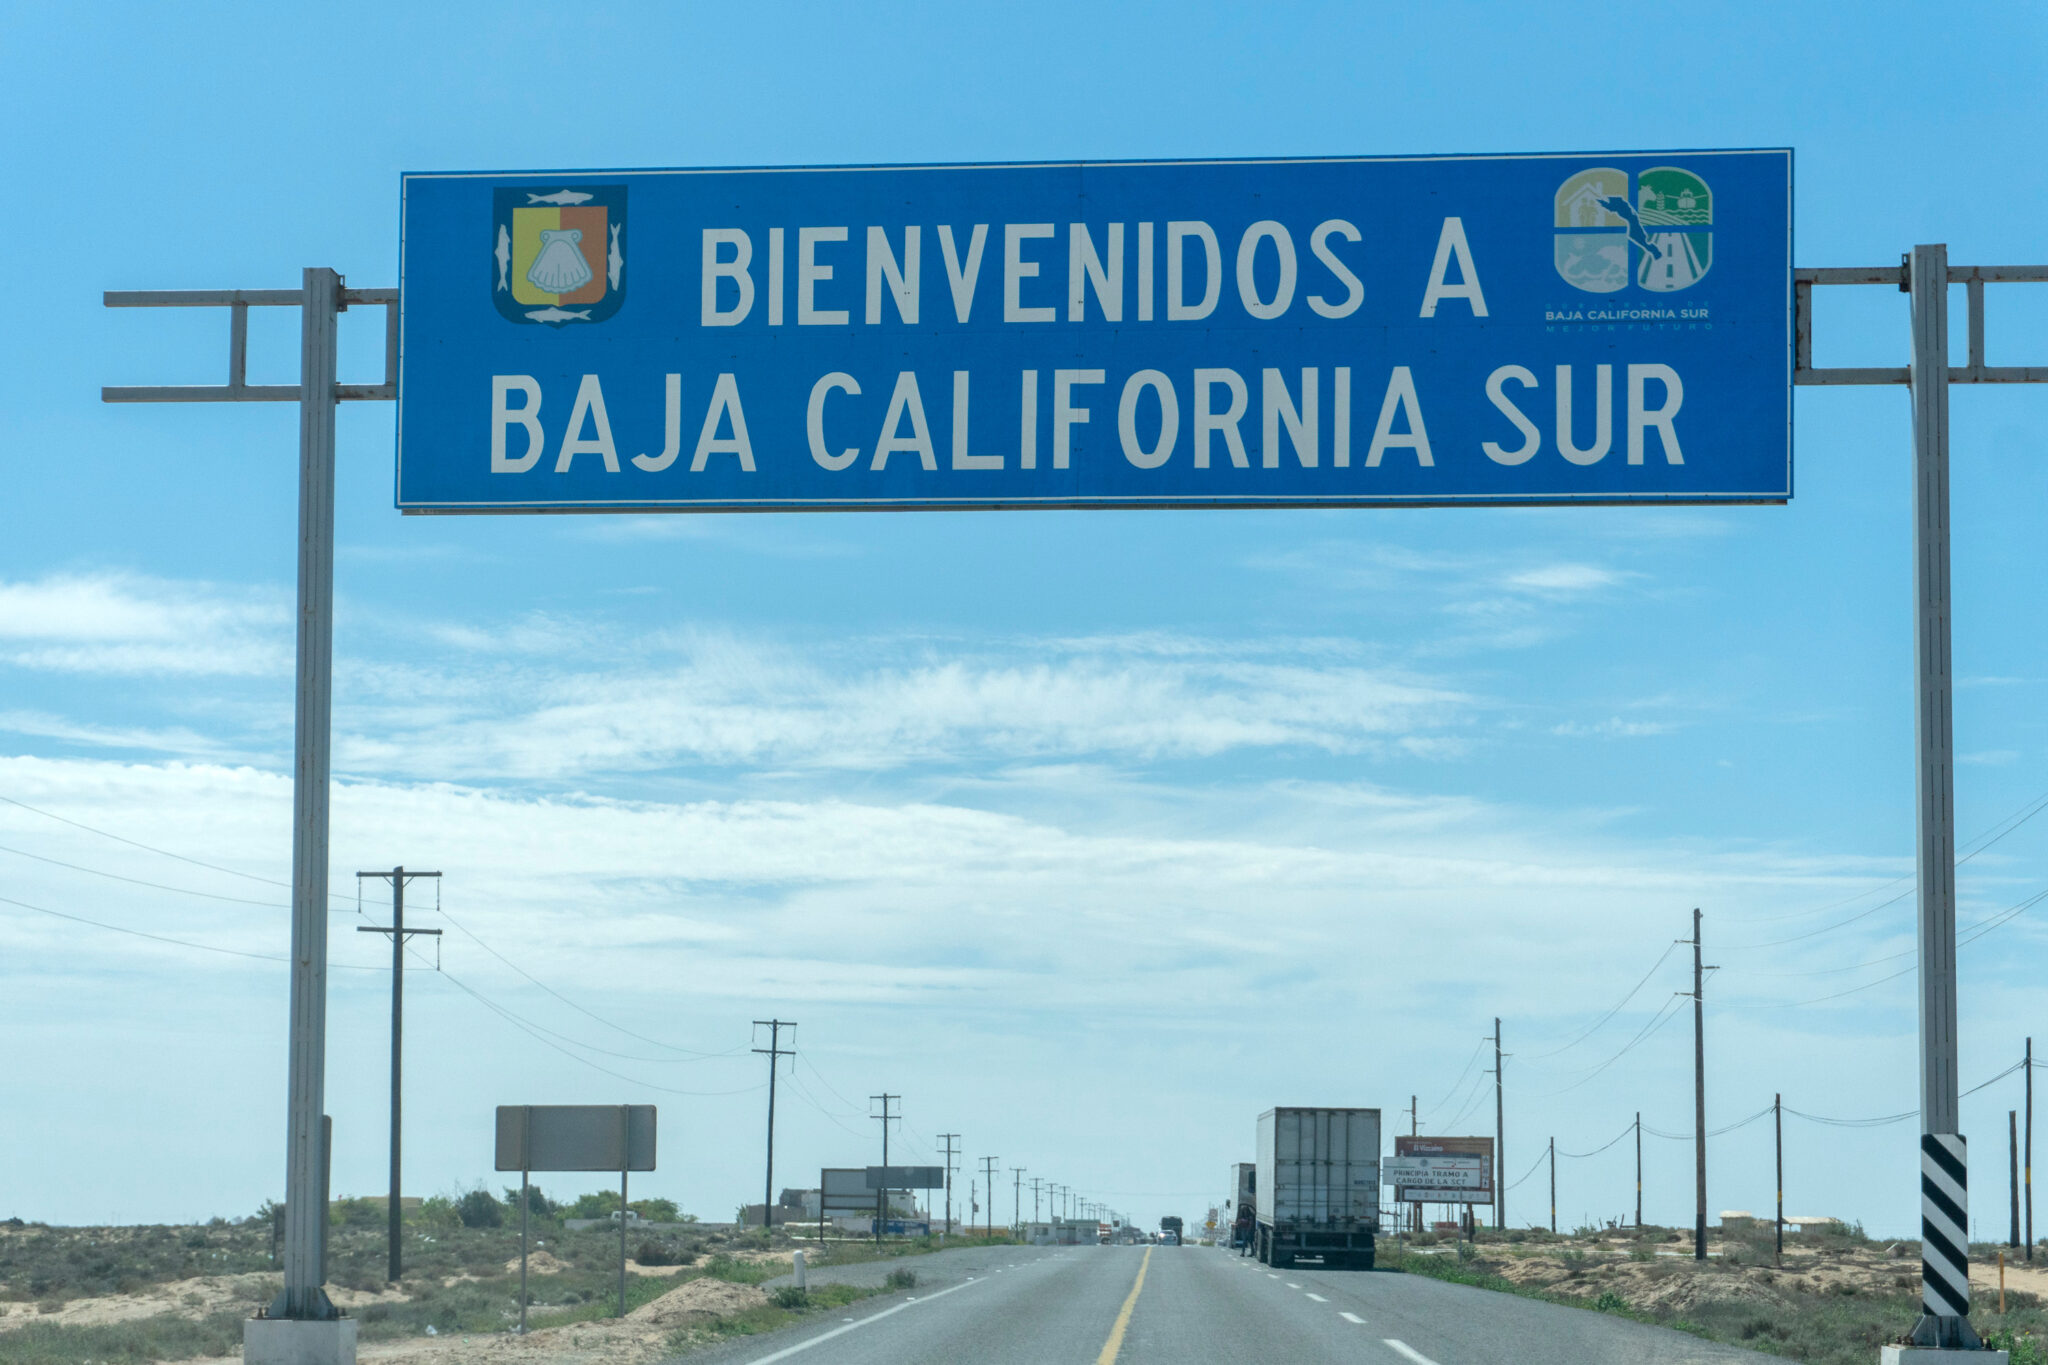 Welcome to Baja California Sur road sign